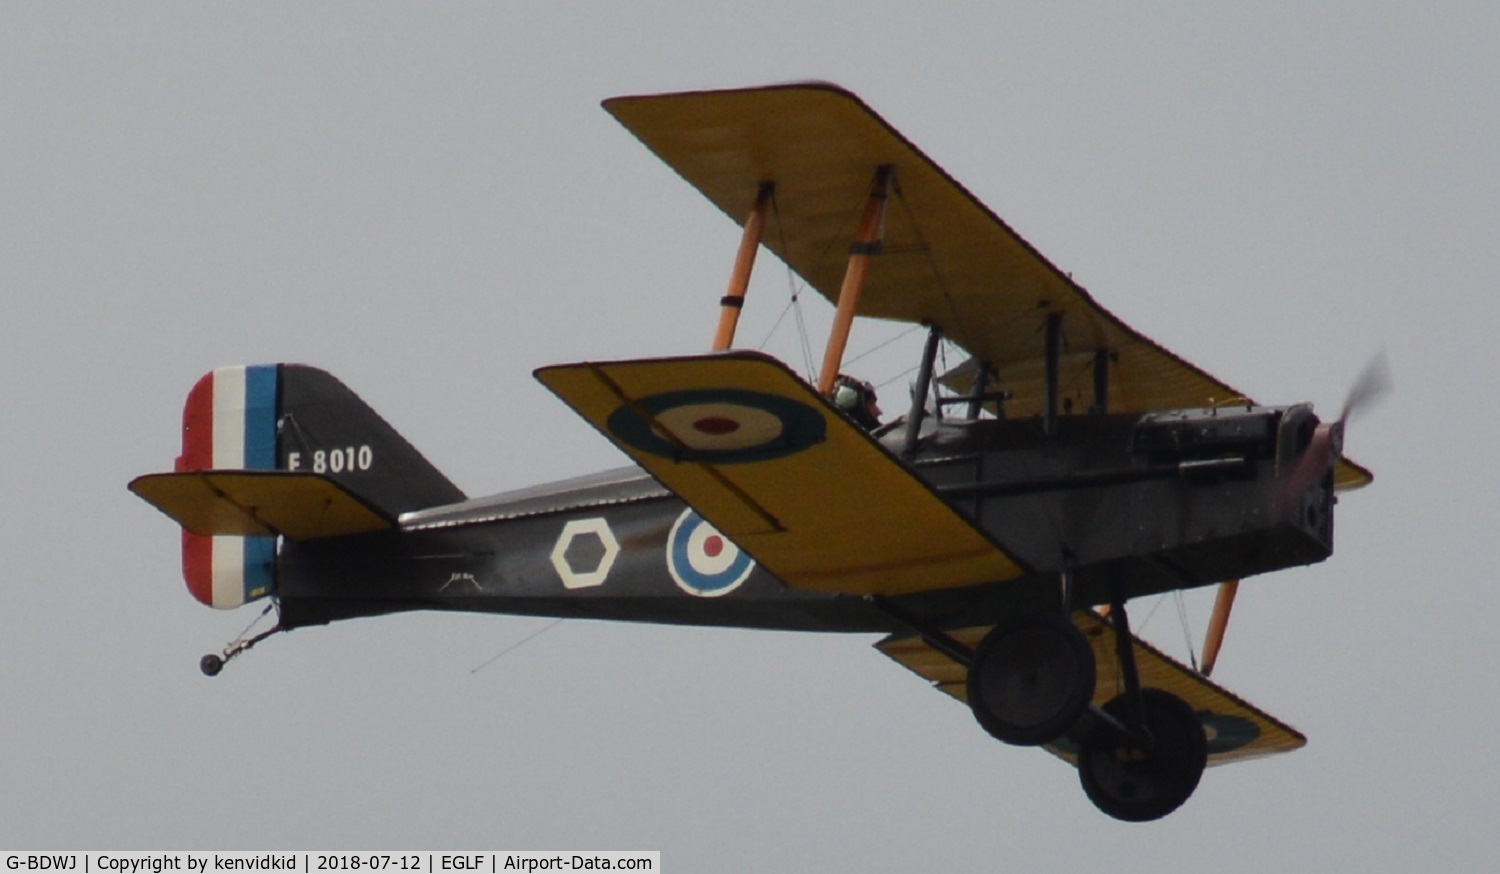 G-BDWJ, 1978 Royal Aircraft Factory SE-5A Replica C/N PFA 020-10034, Validating as part of The Great Warbirds Display Team for FIA 2018.